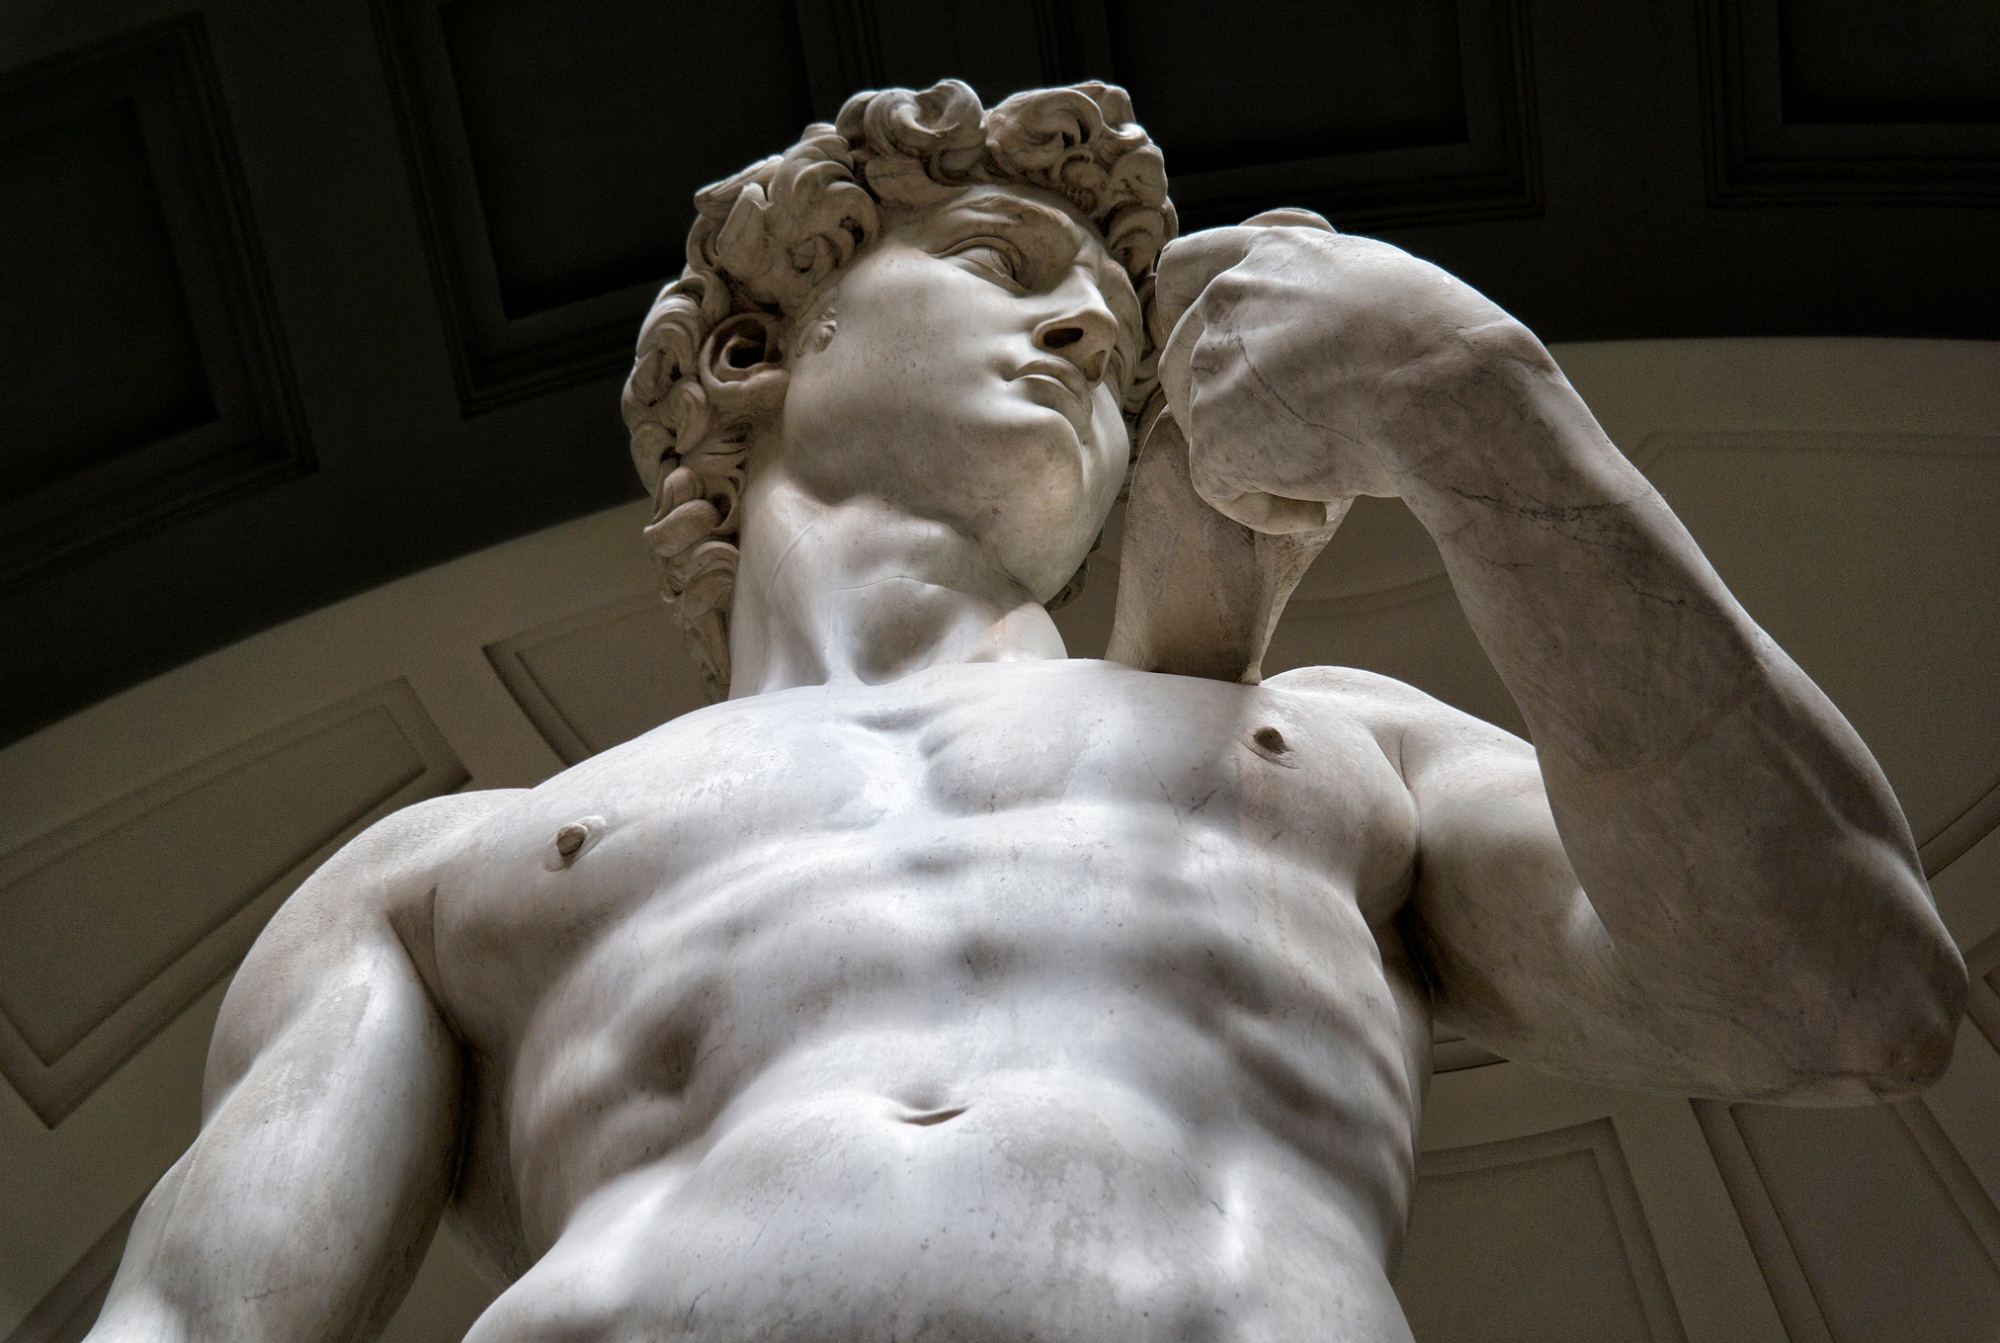 Michelangelo's David: 7 facts you might not know